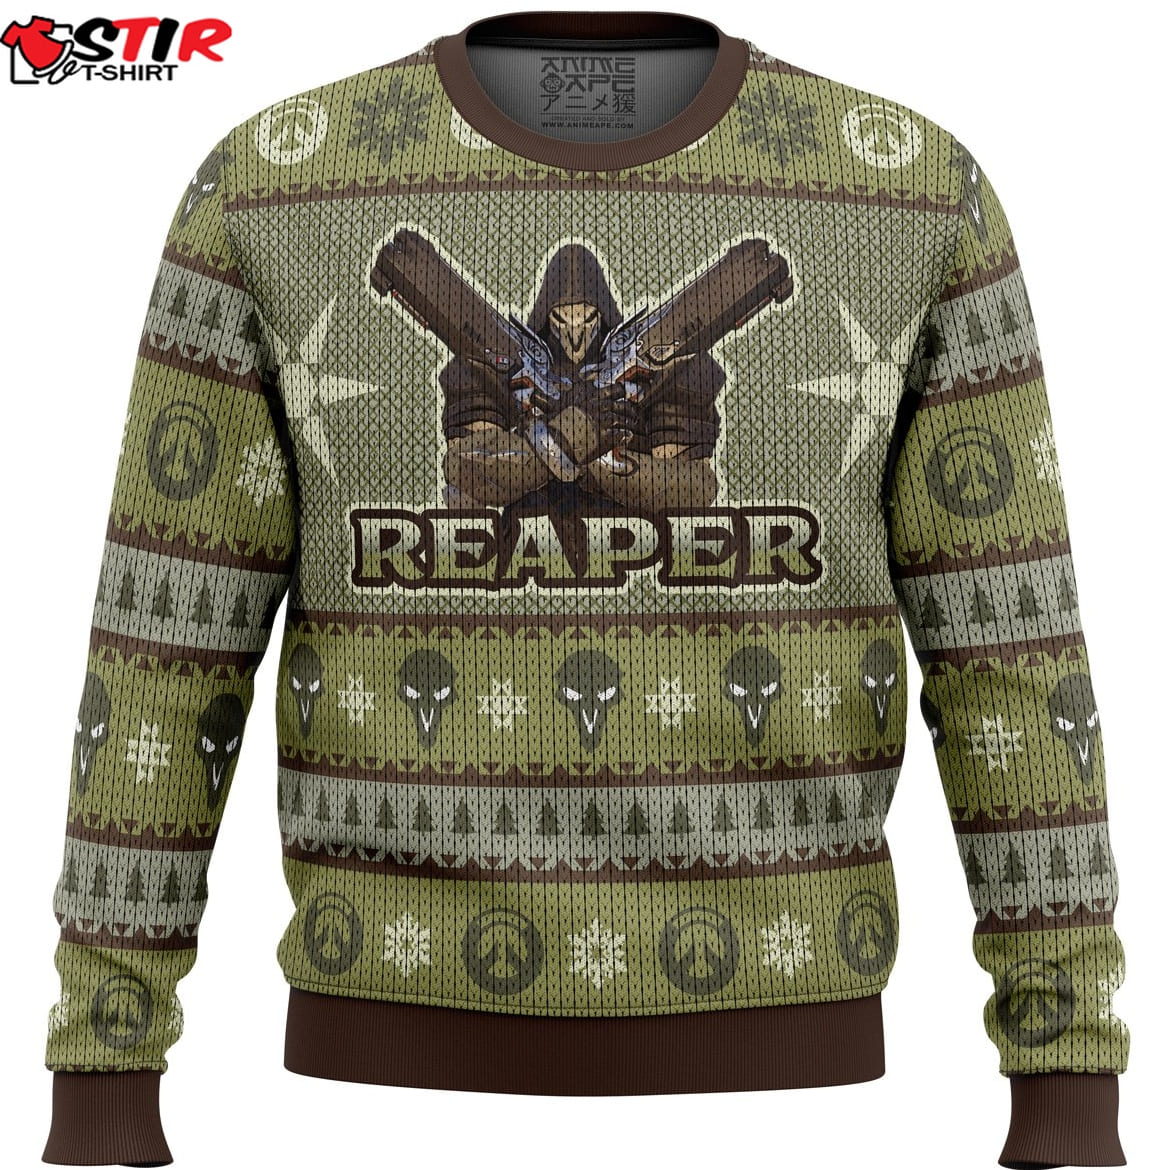 Overwatch The Reaper Ugly Christmas Sweater Stirtshirt